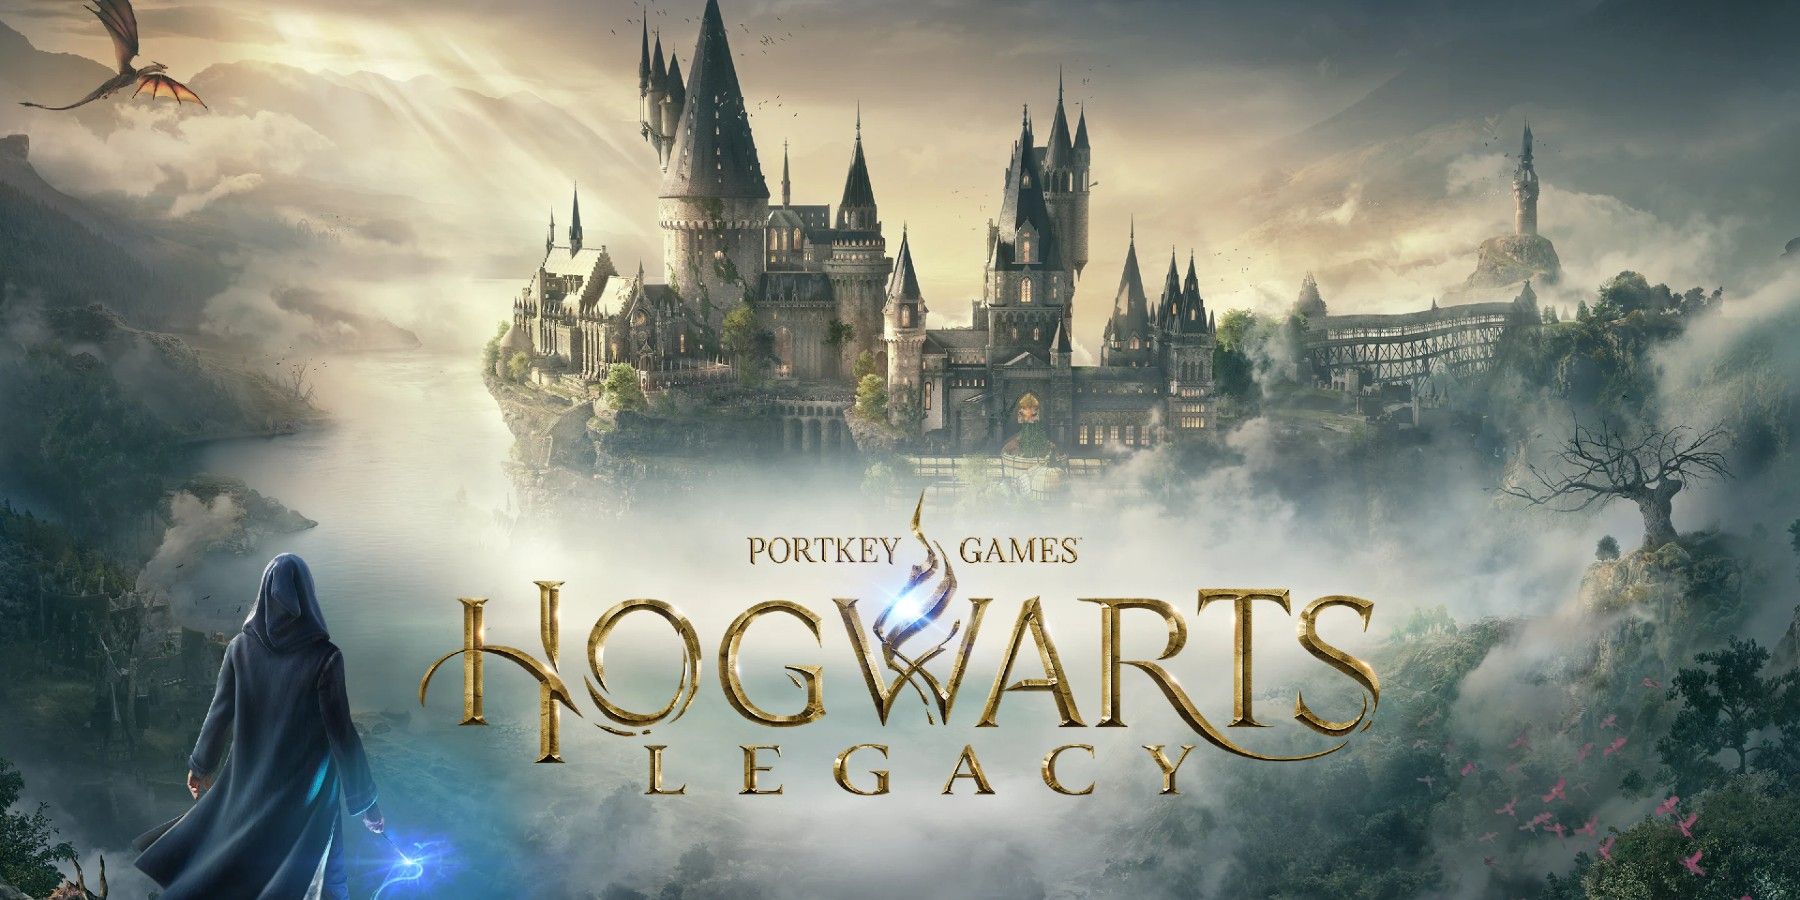 Hogwarts LEgacy Cover Words